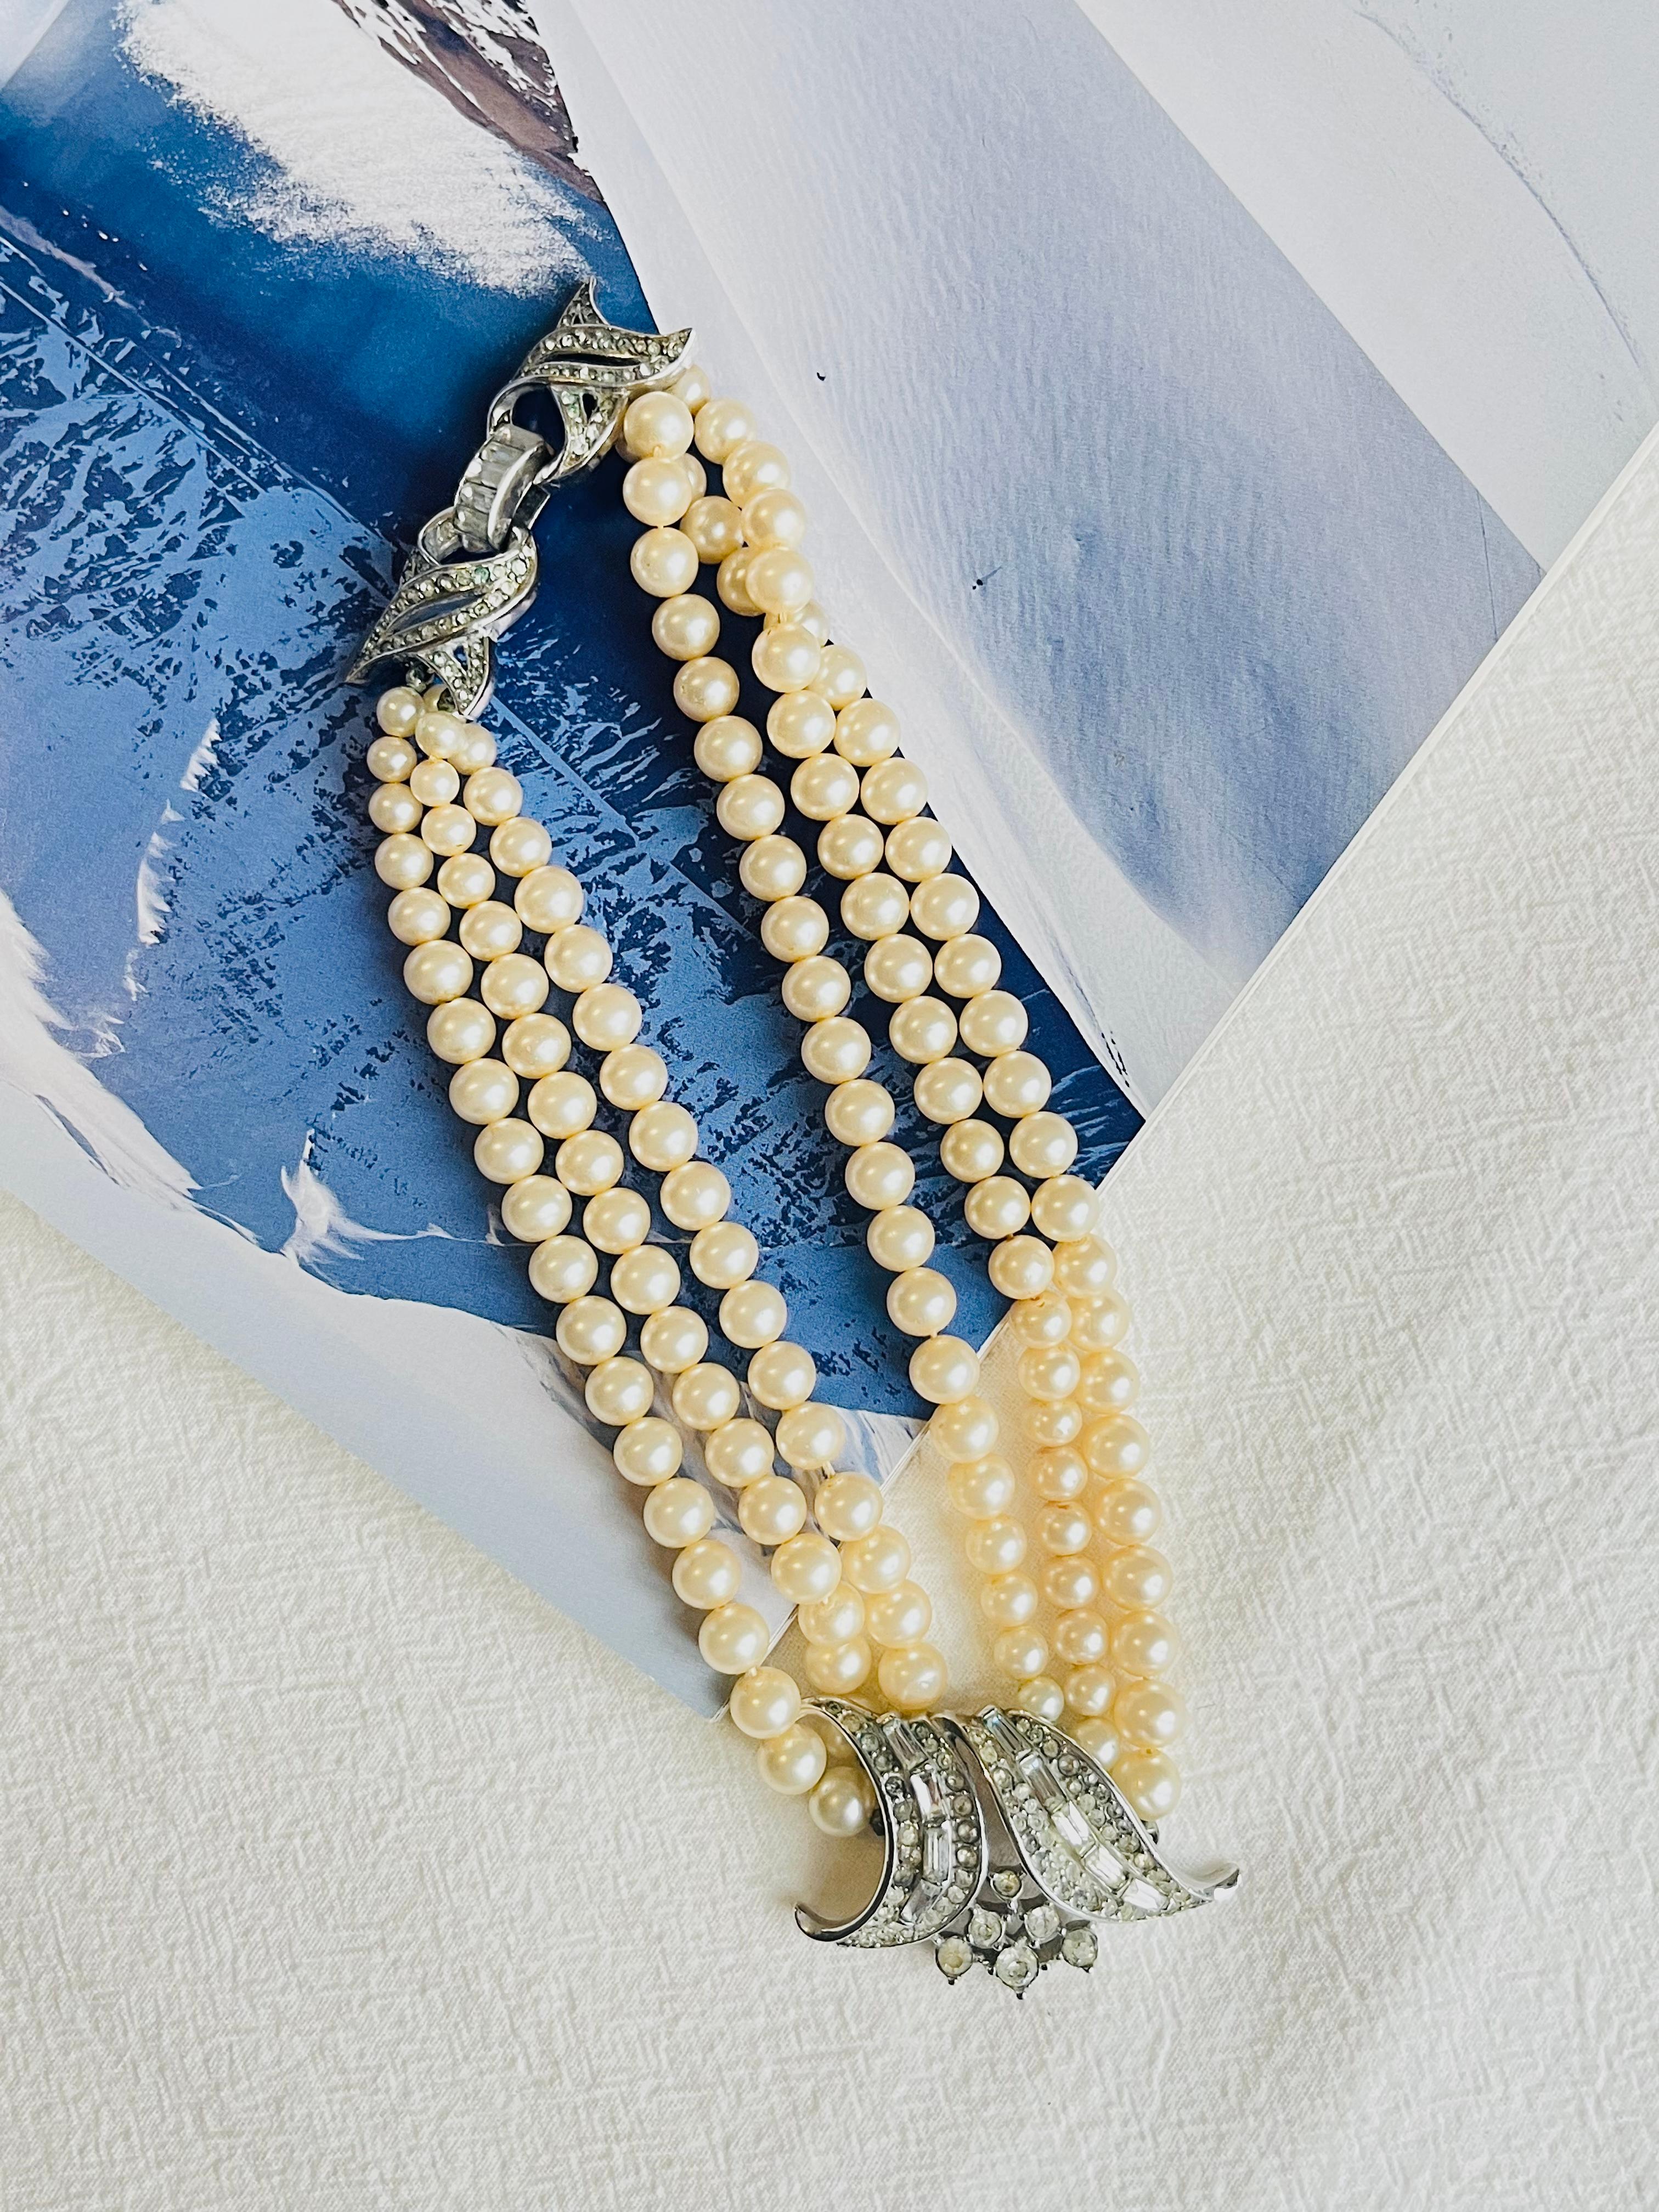 Crown Trifari 1940s Trio Strands Layer Pearls Crystals Pendant Choker Necklace In Good Condition For Sale In Wokingham, England